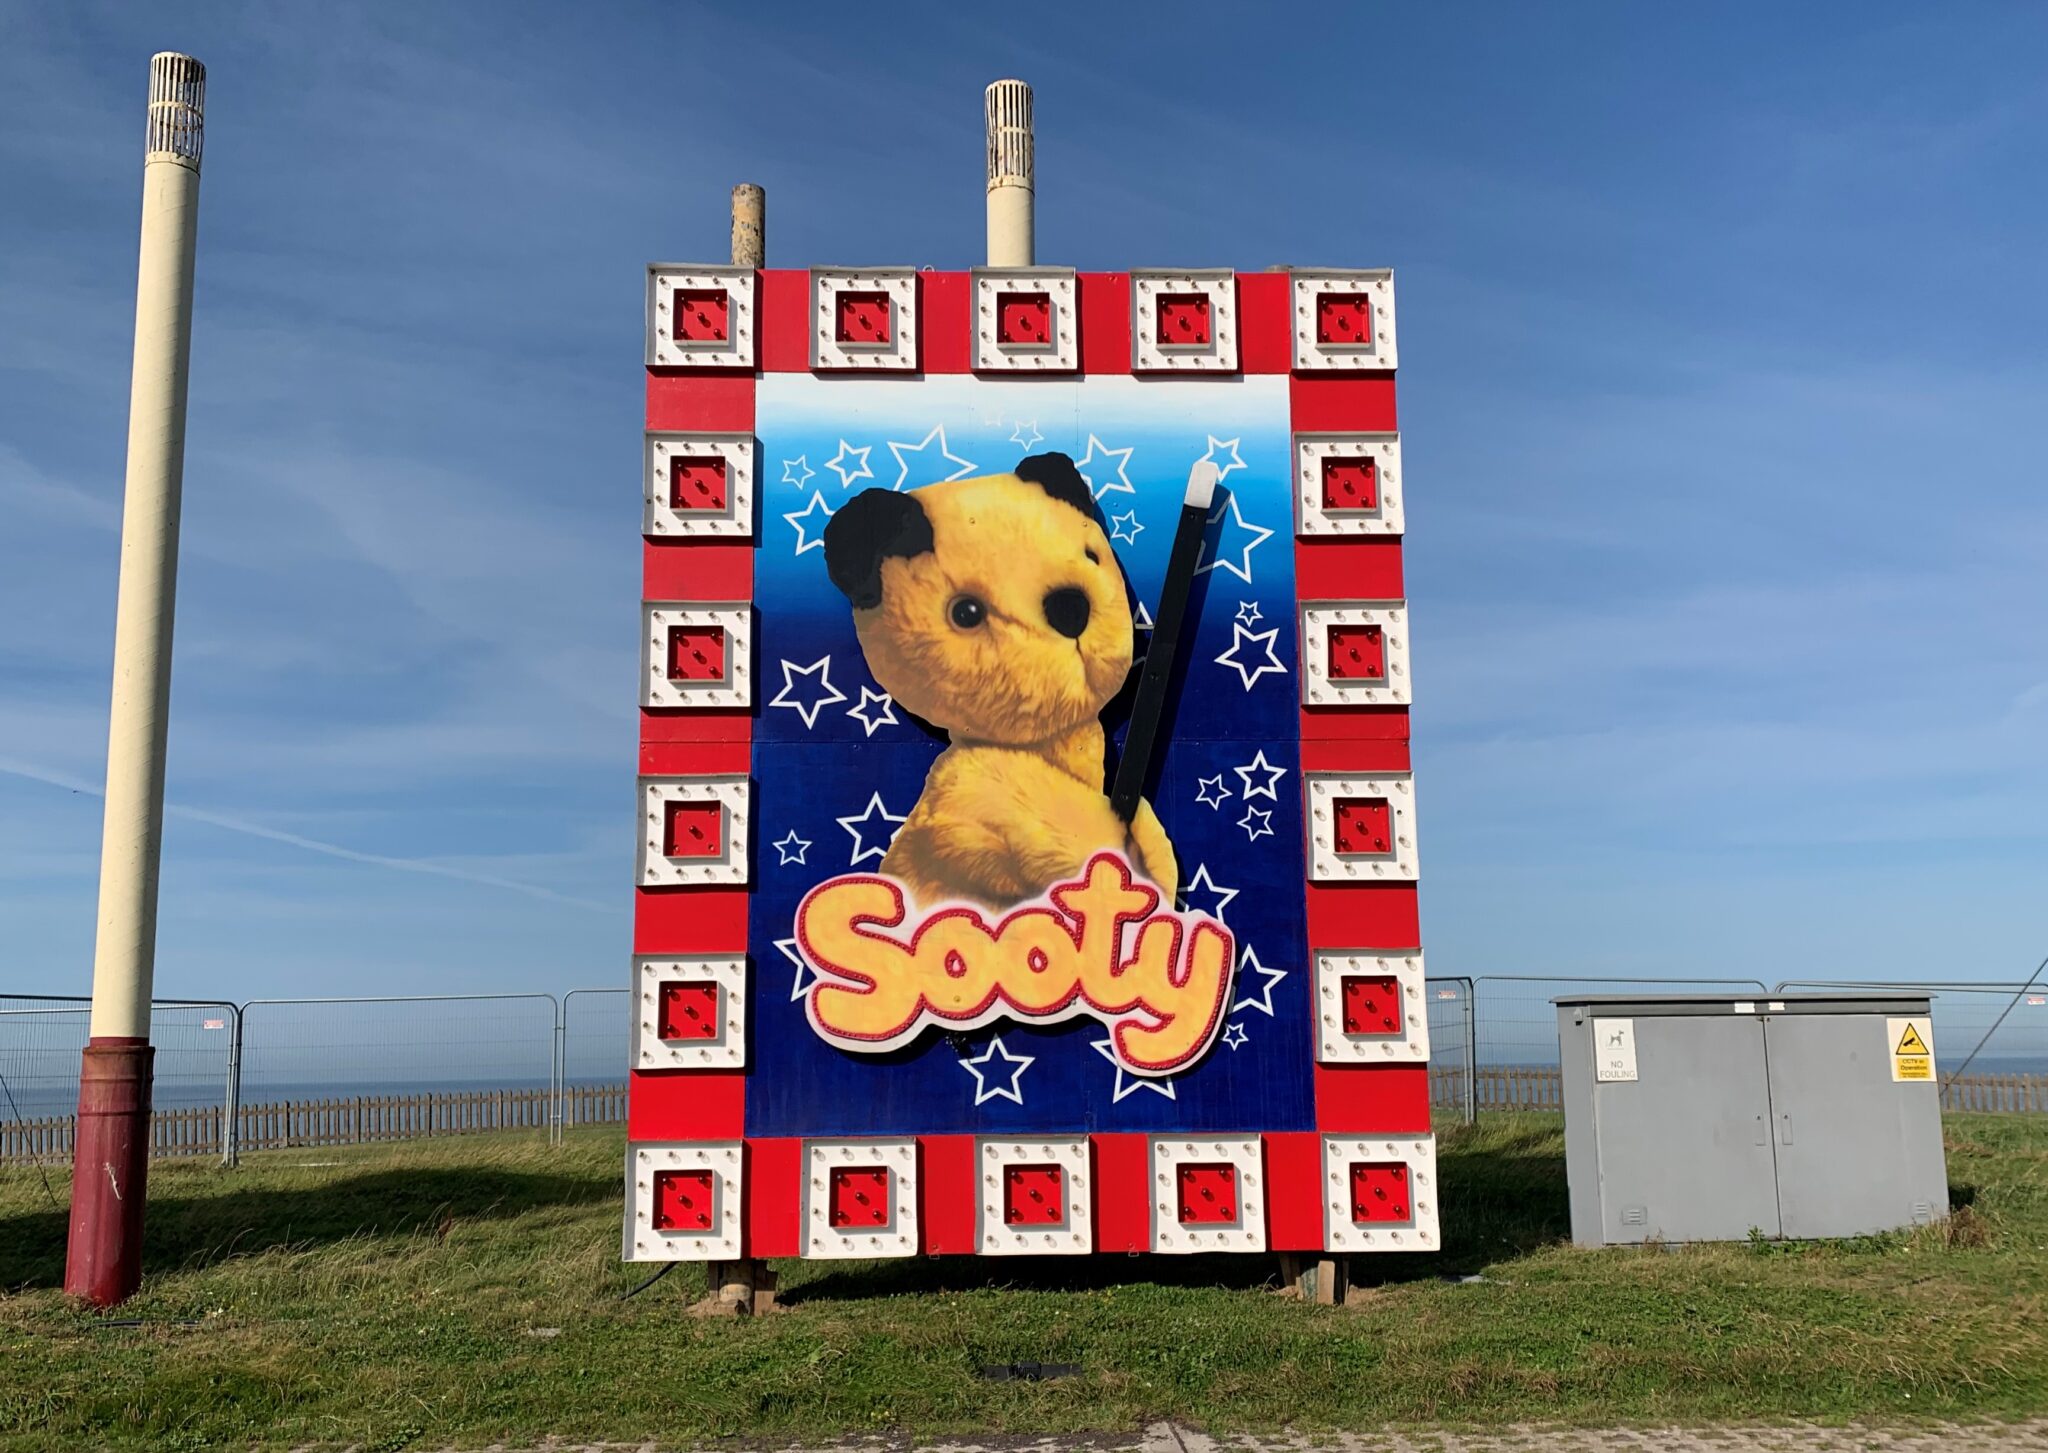 Blackpool is where Sooty comes from